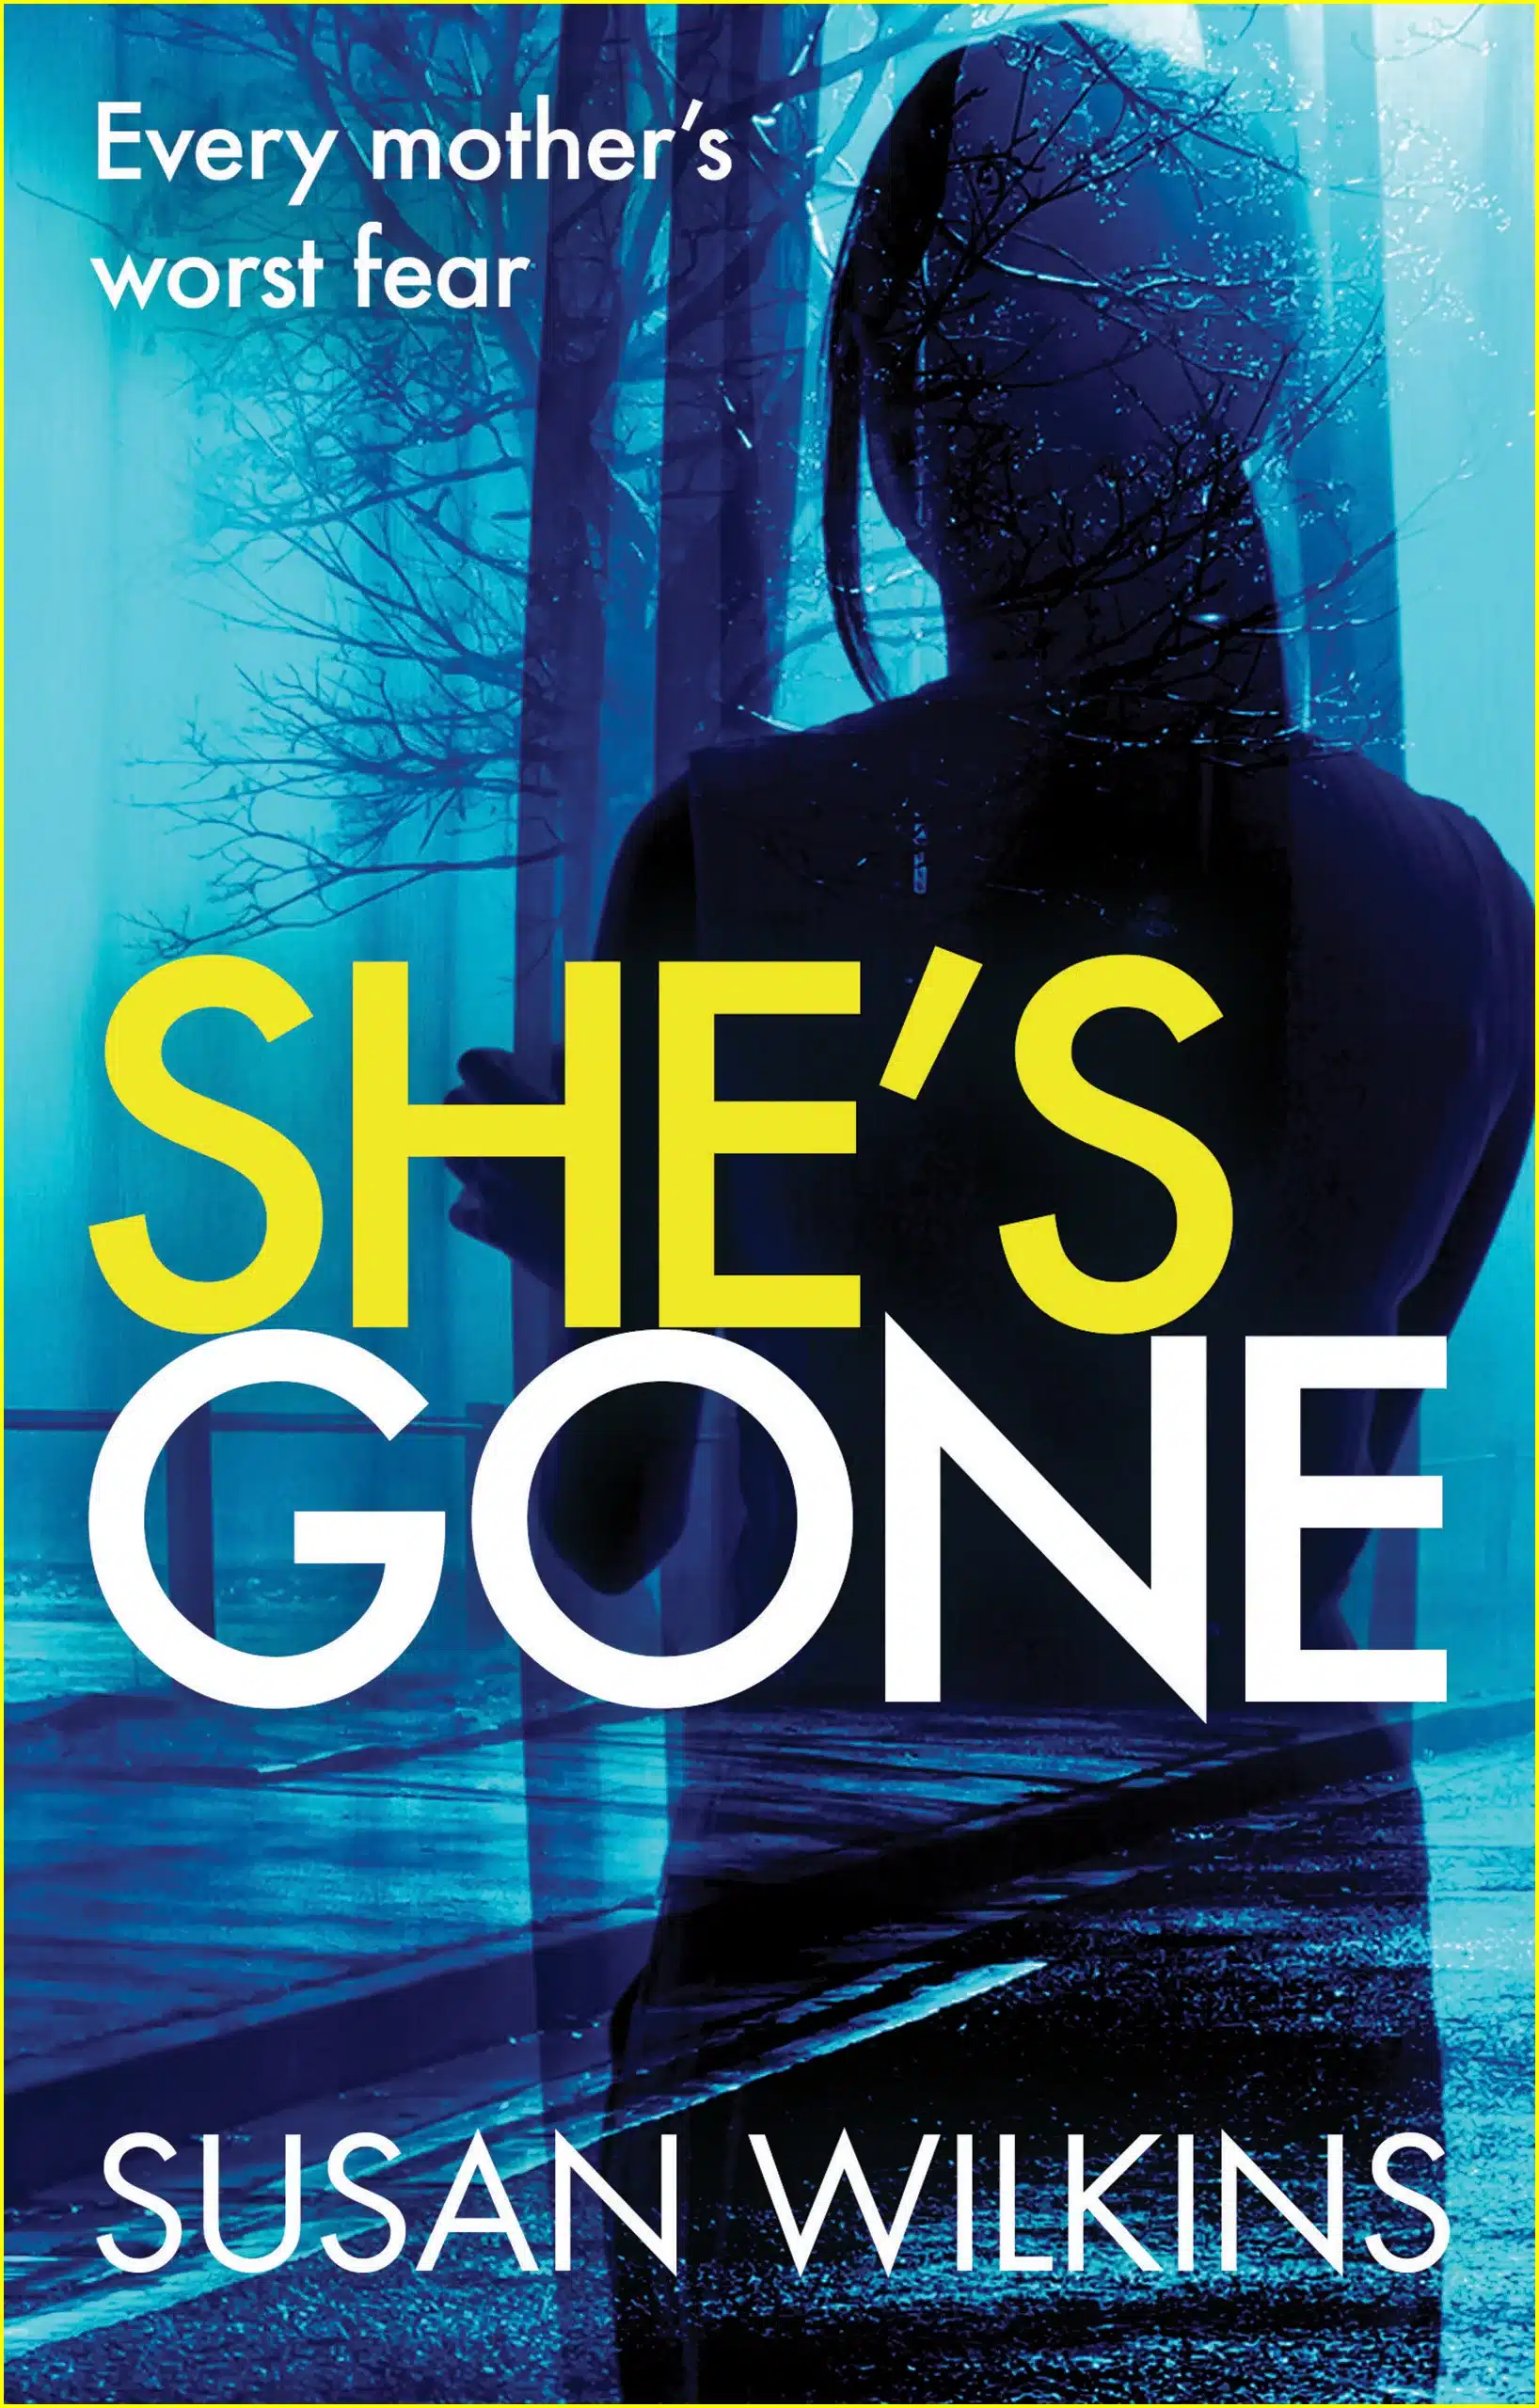 Image of book cover She's Gone by Susan Wilkins. A lone female figure standing at a large window looking out onto a dark street.